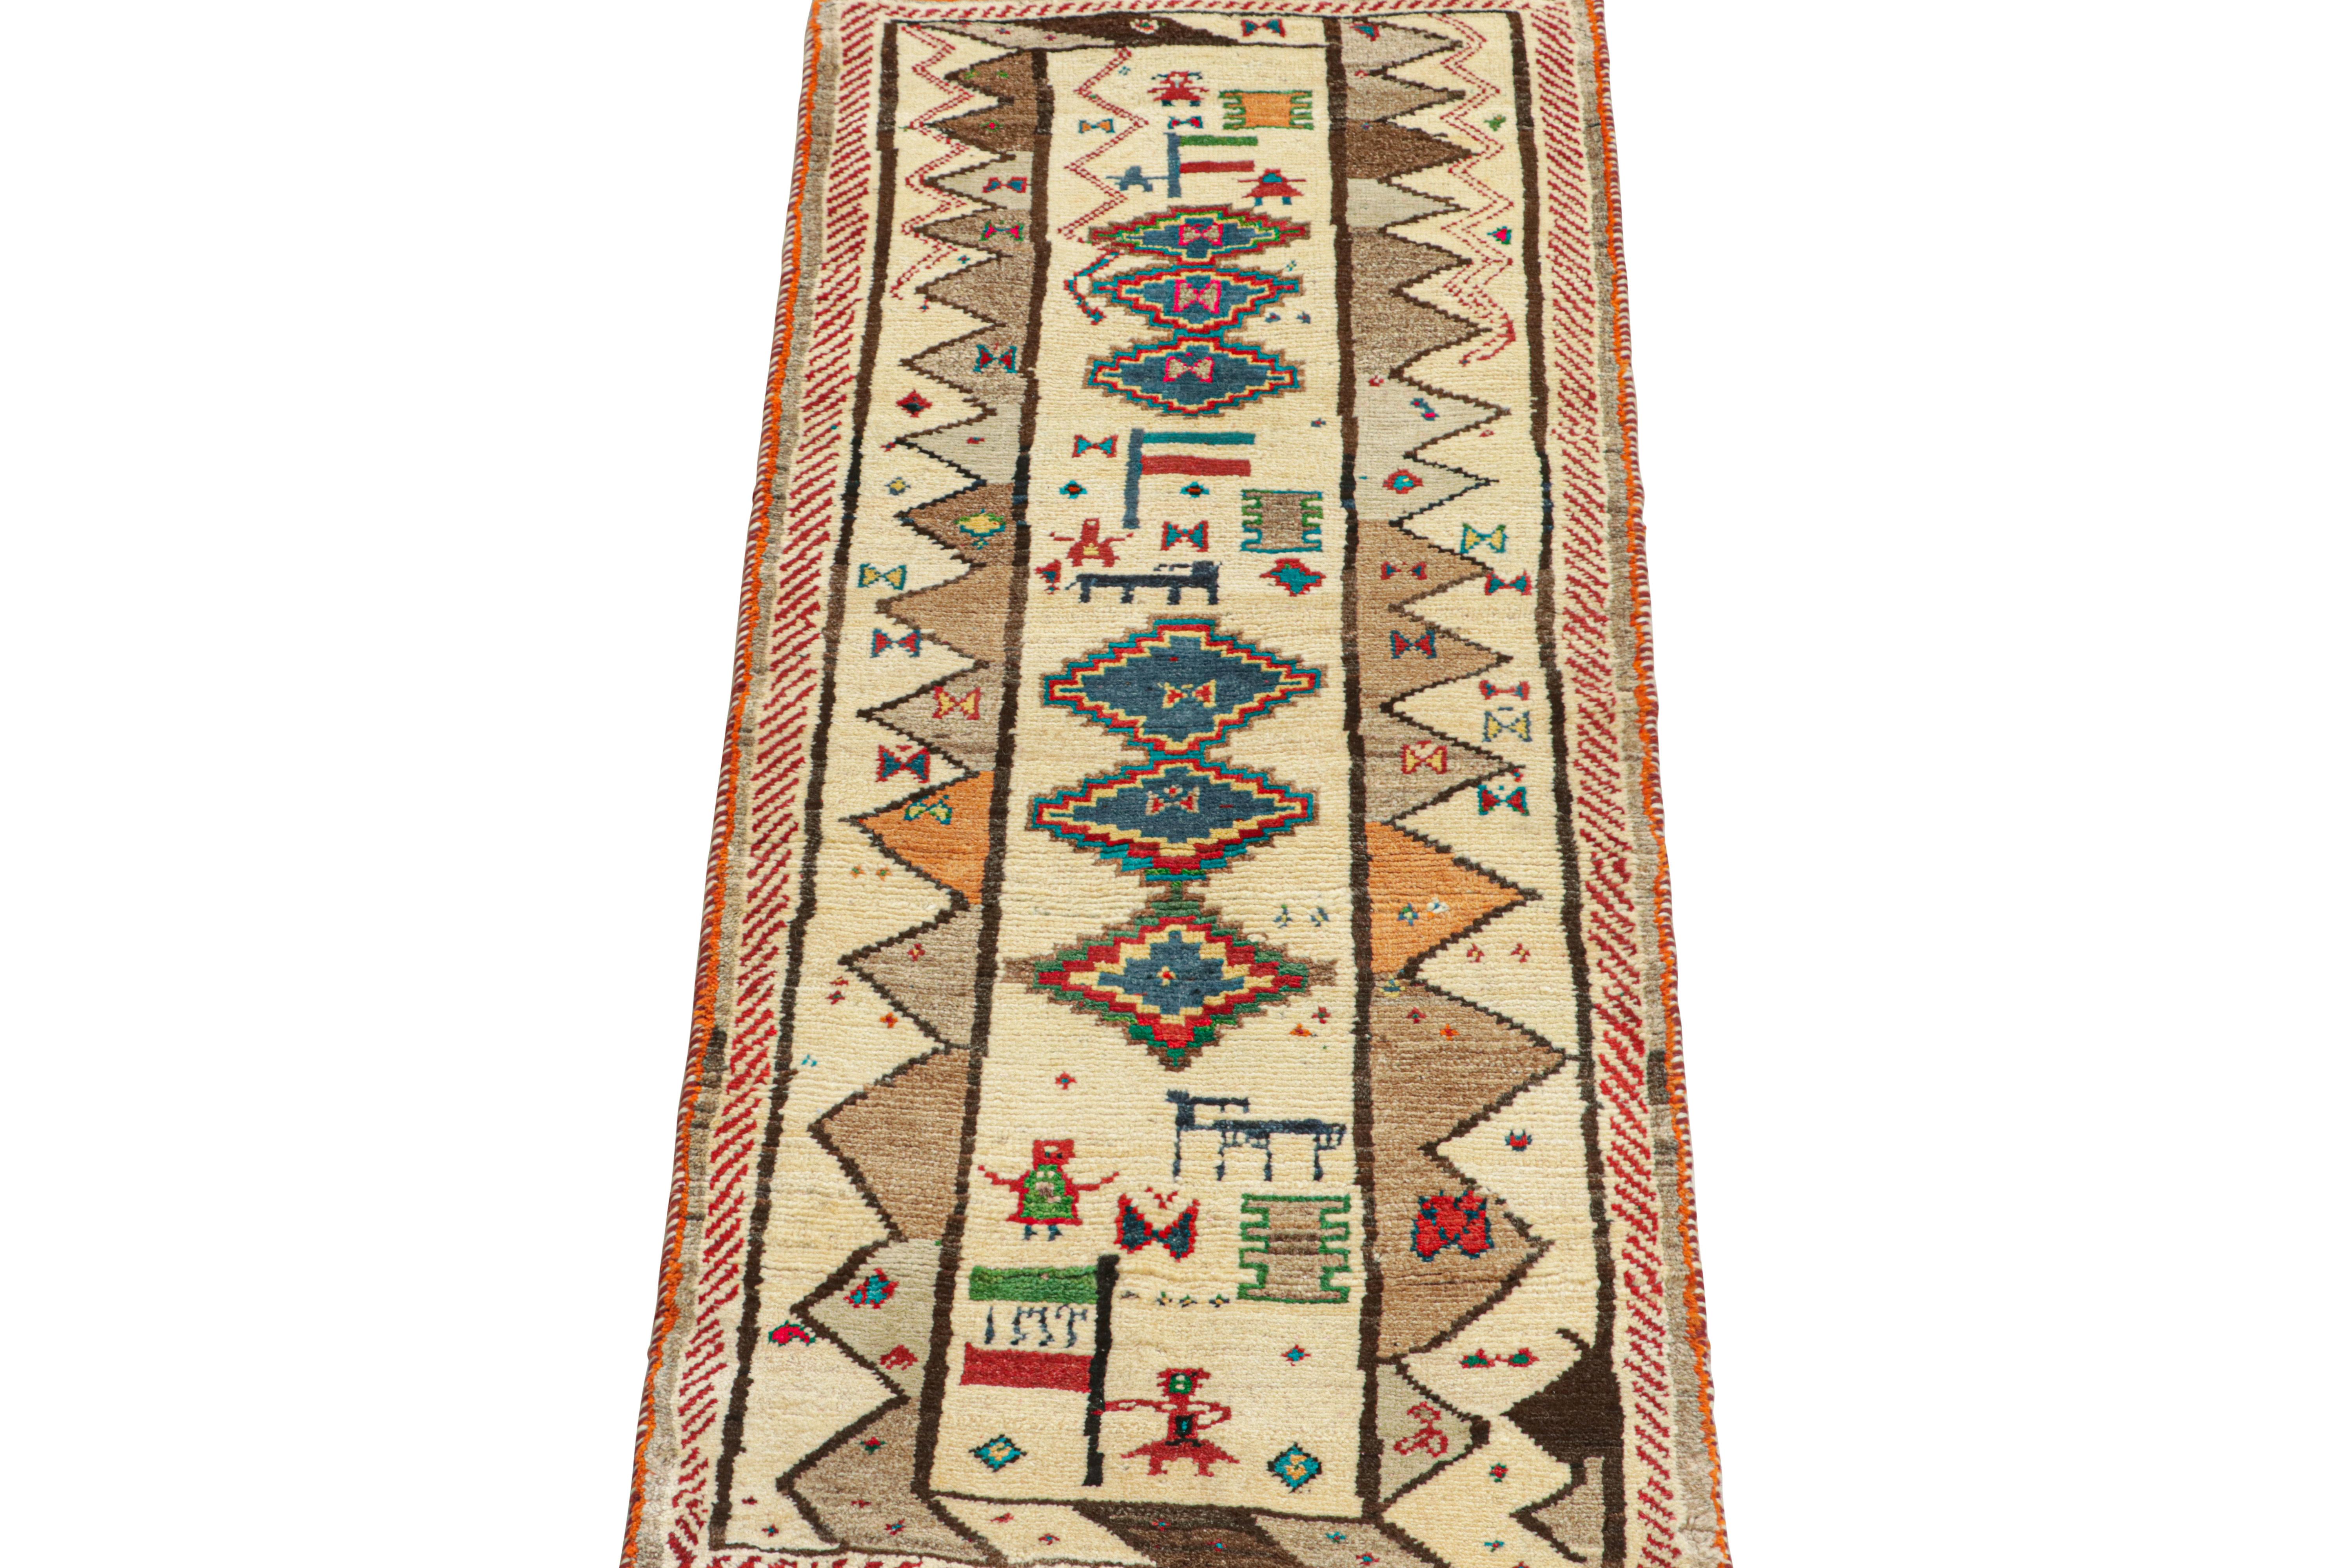 This vintage 2x6 Persian tribal runner is hand-knotted in wool, and originates circa 1950-1960.

Further on the Design:

The design enjoys a beige field and medallion patterns in navy blue with vibrant accent colors. Keen eyes will admire pictorial